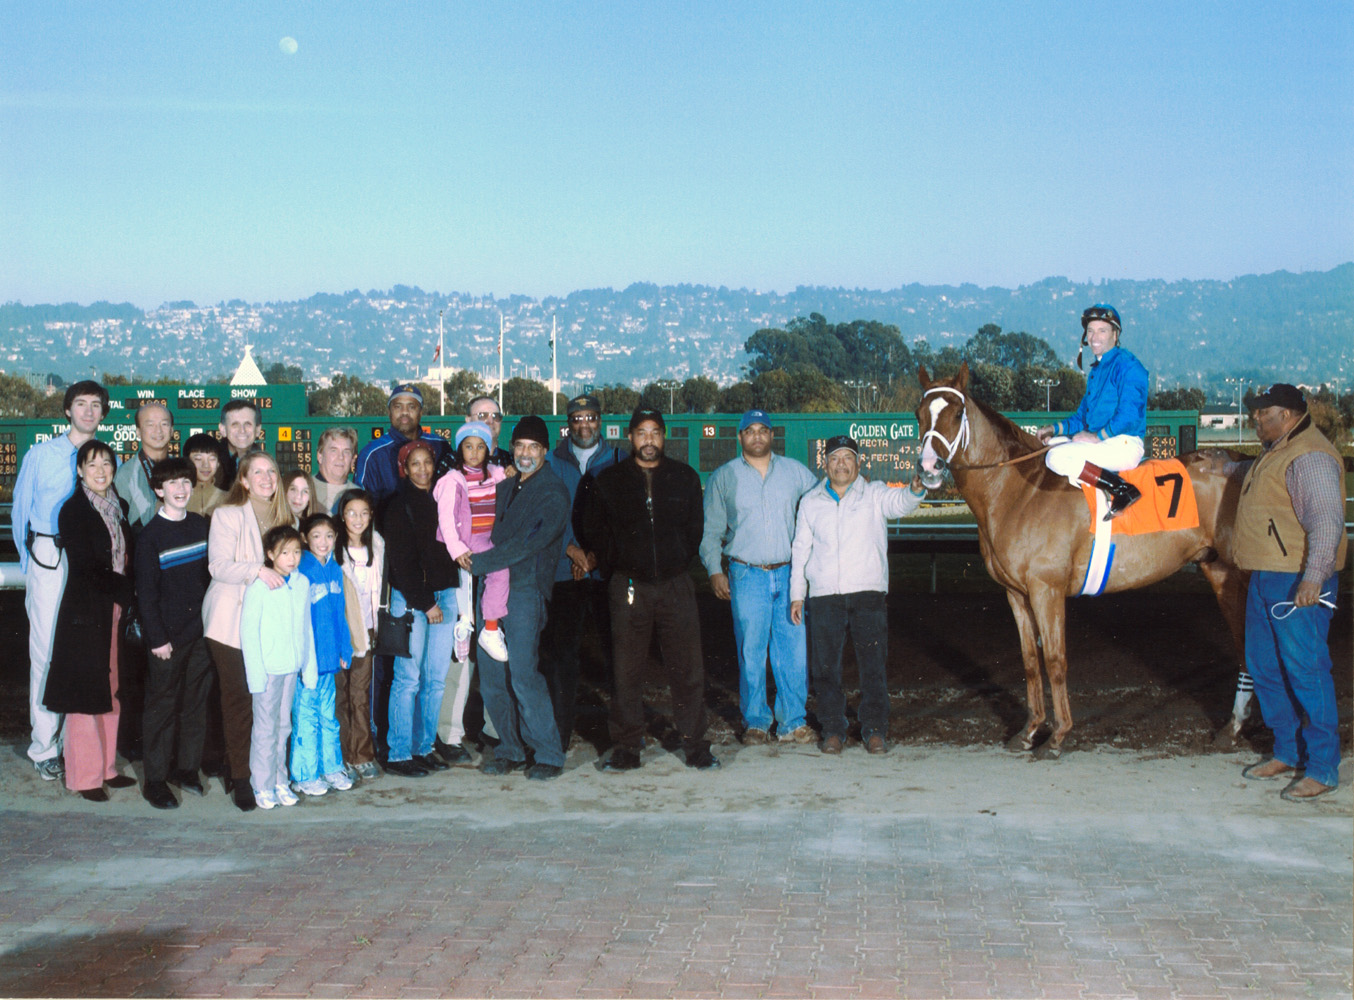 Russell Baze and Hollow Memories in the winner's circle at Golden Gate Fields. Baze would become the sport's winningest jockey in 2006 (Golden Gate Fields Photo/Museum Collection)